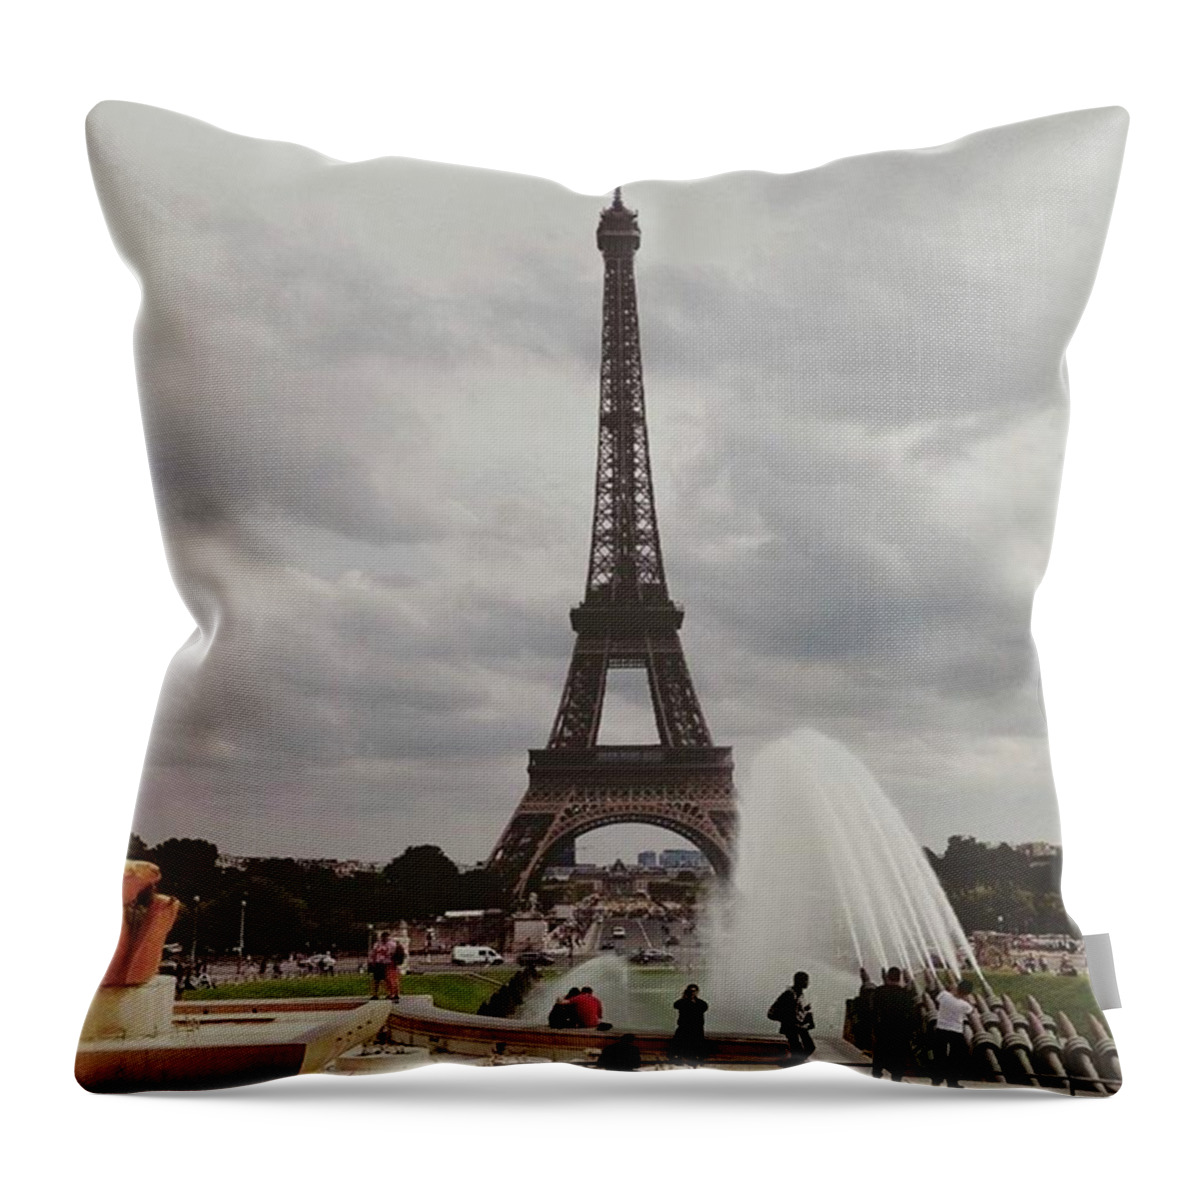 Trip Throw Pillow featuring the photograph Eiffel Tower W by Simone Petrucci